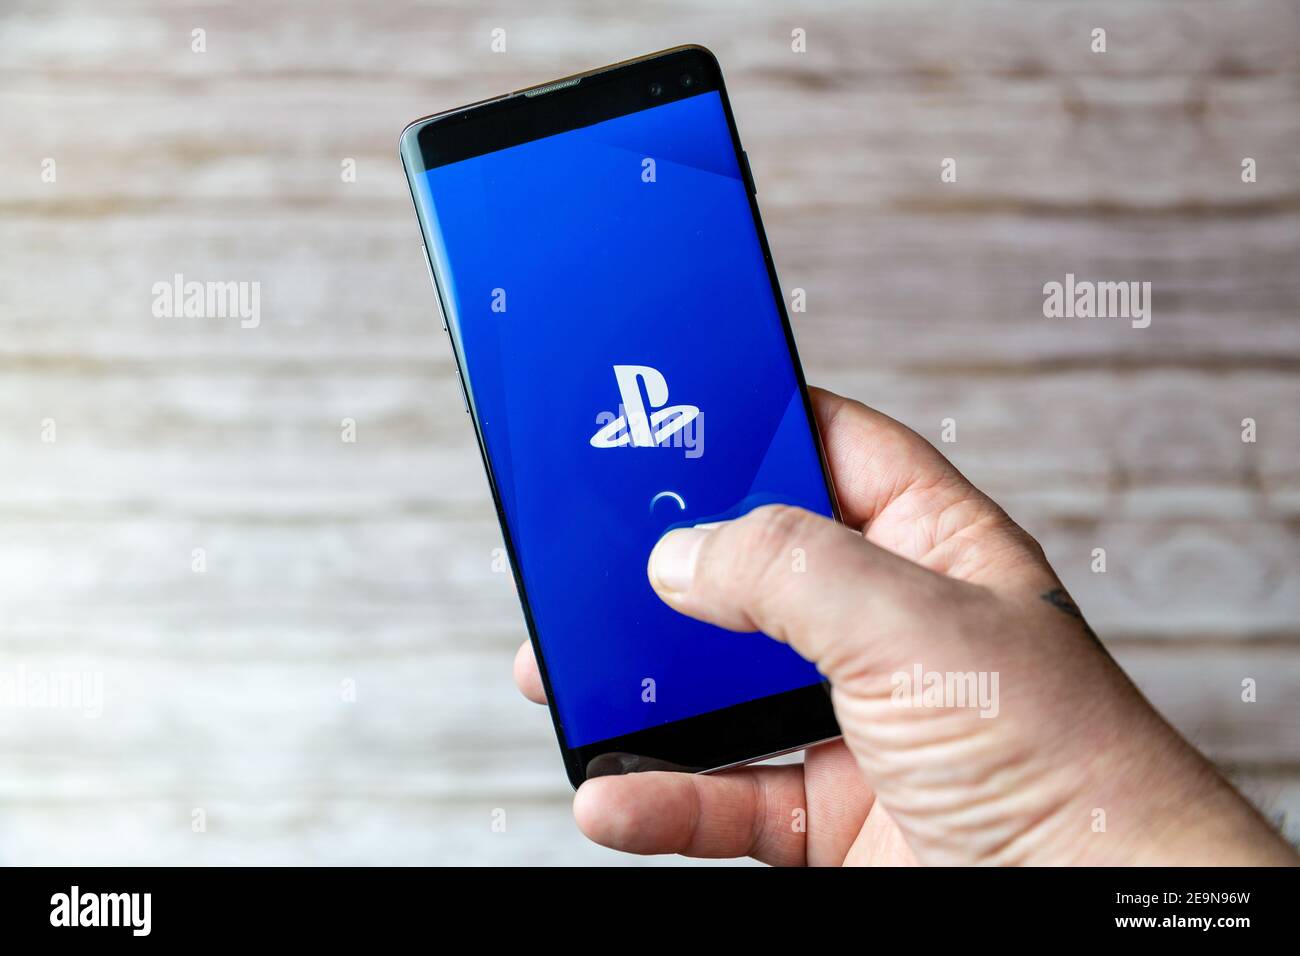 A Mobile phone or cell phone being held showing the Playstation mobile app  open on screen Stock Photo - Alamy